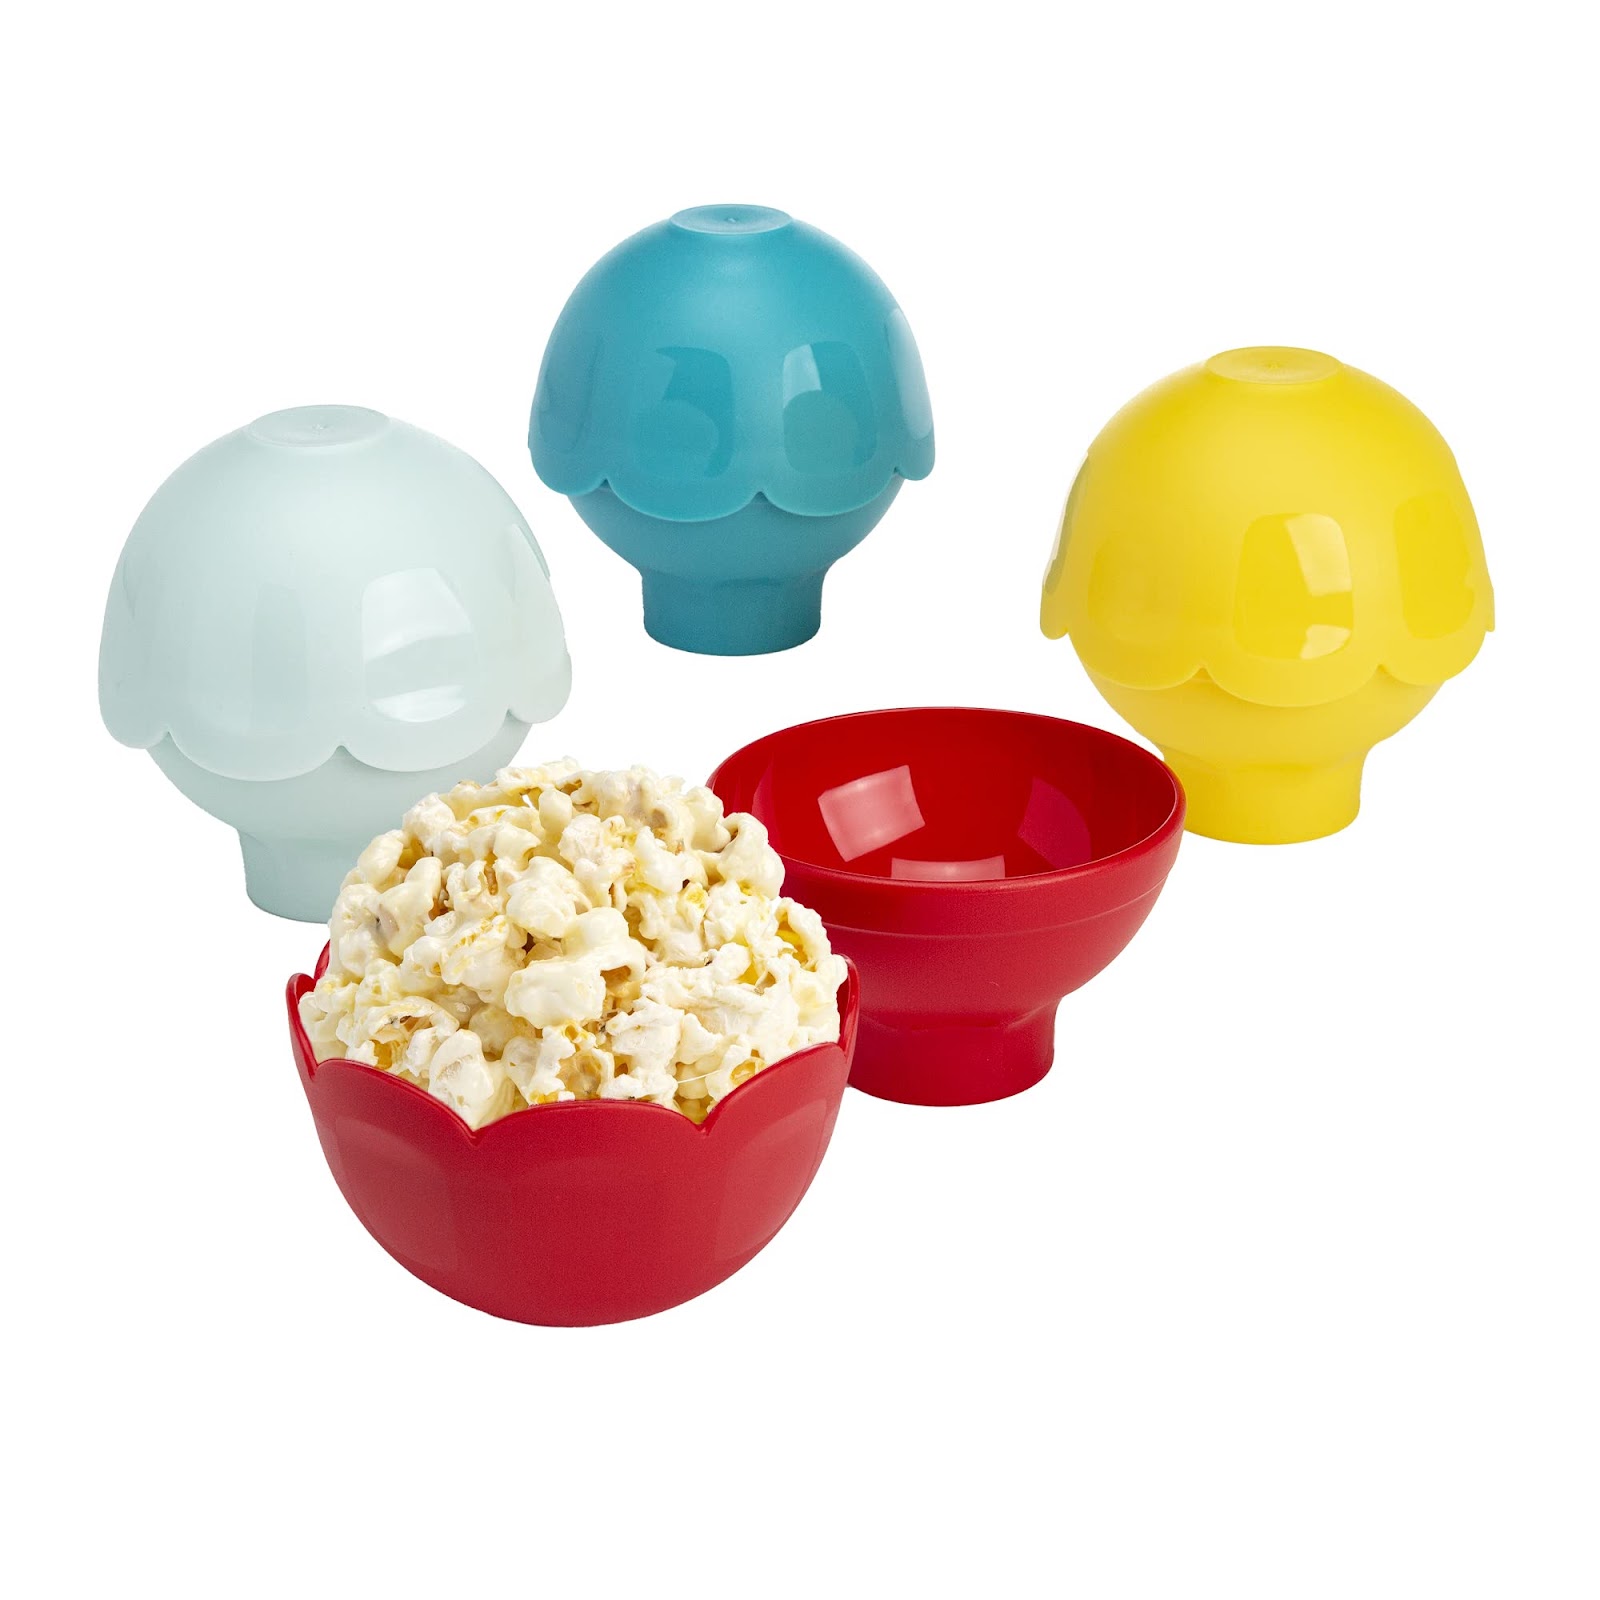 The Original Popco Silicone Microwave Popcorn Popper with Handles Silicone Popcorn Maker Collapsible Bowl BPA Free and Dishwasher Safe - 15 Colors Ava